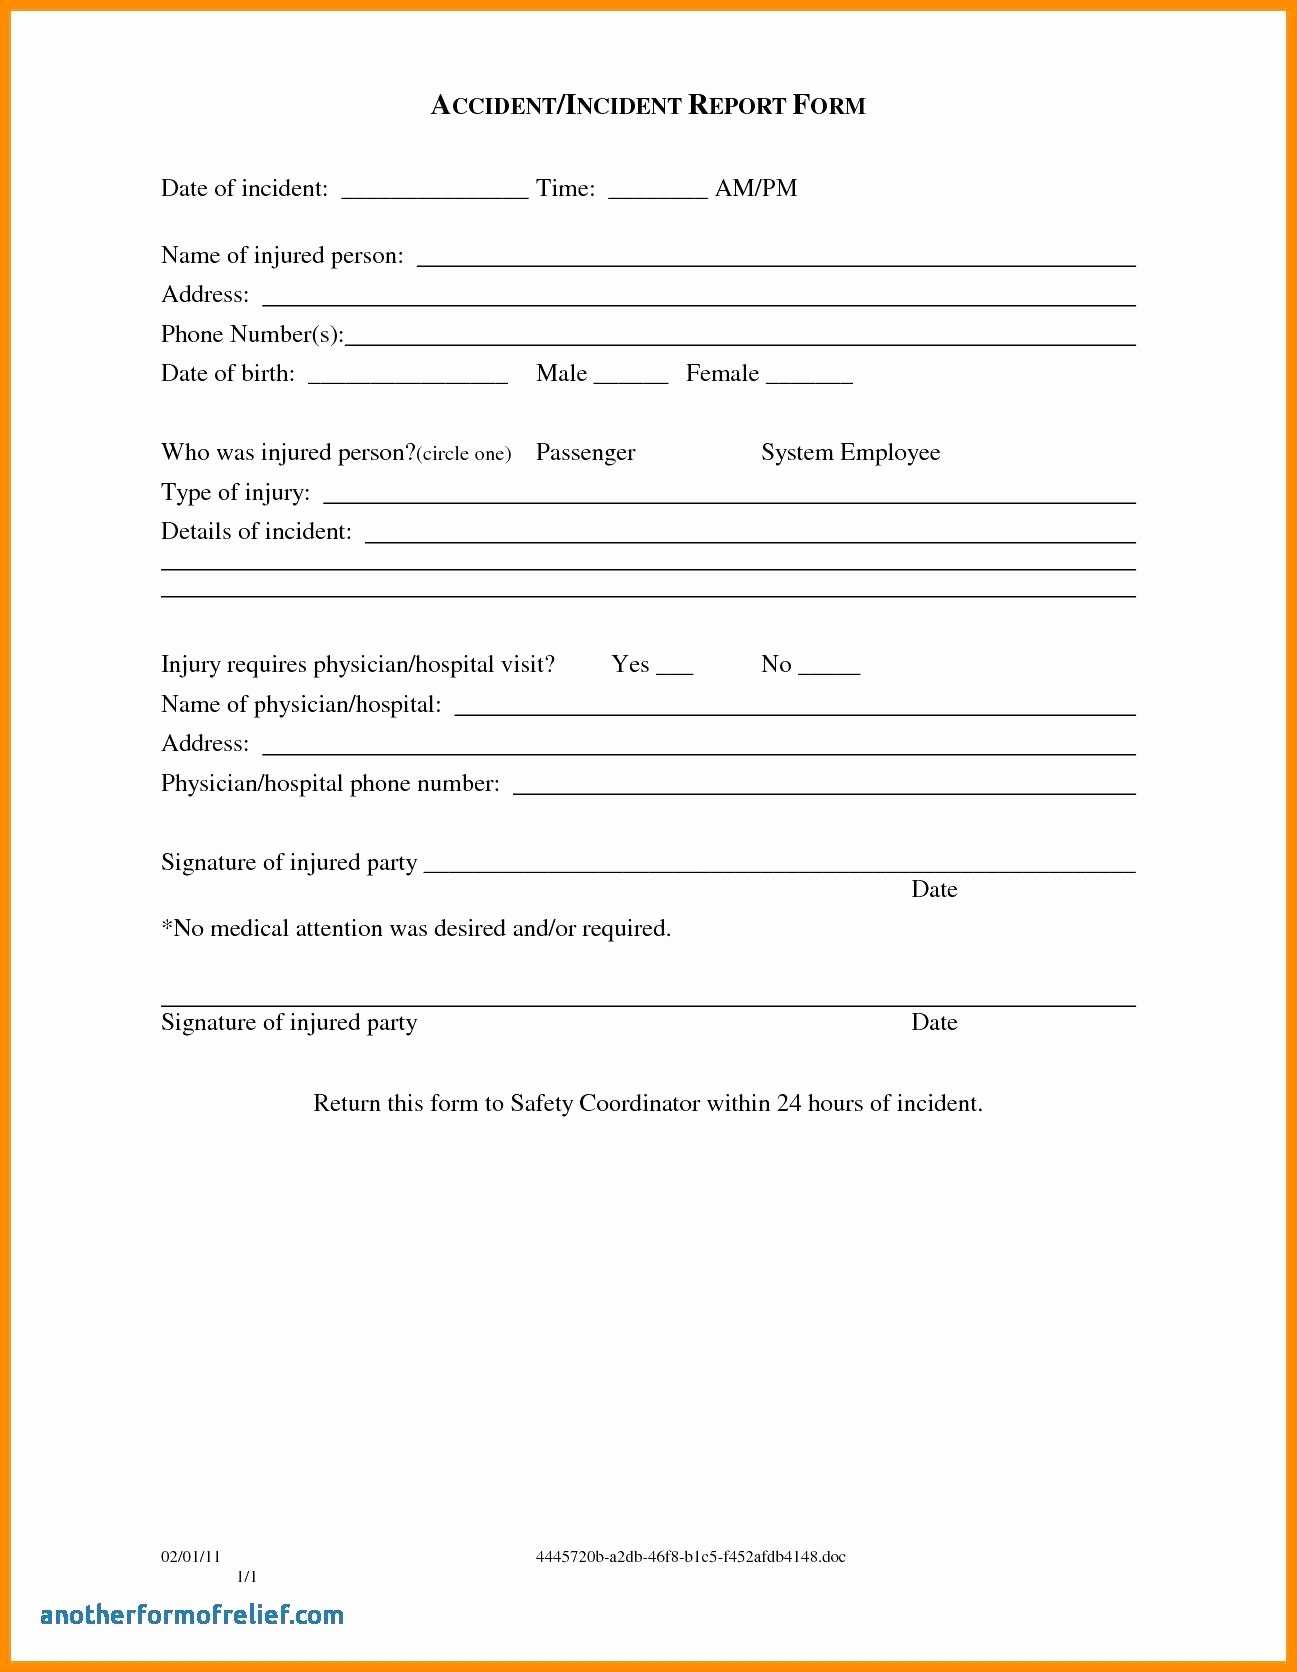 022 Template Ideas Accident Report Forms Incident Hazard For For Incident Hazard Report Form Template